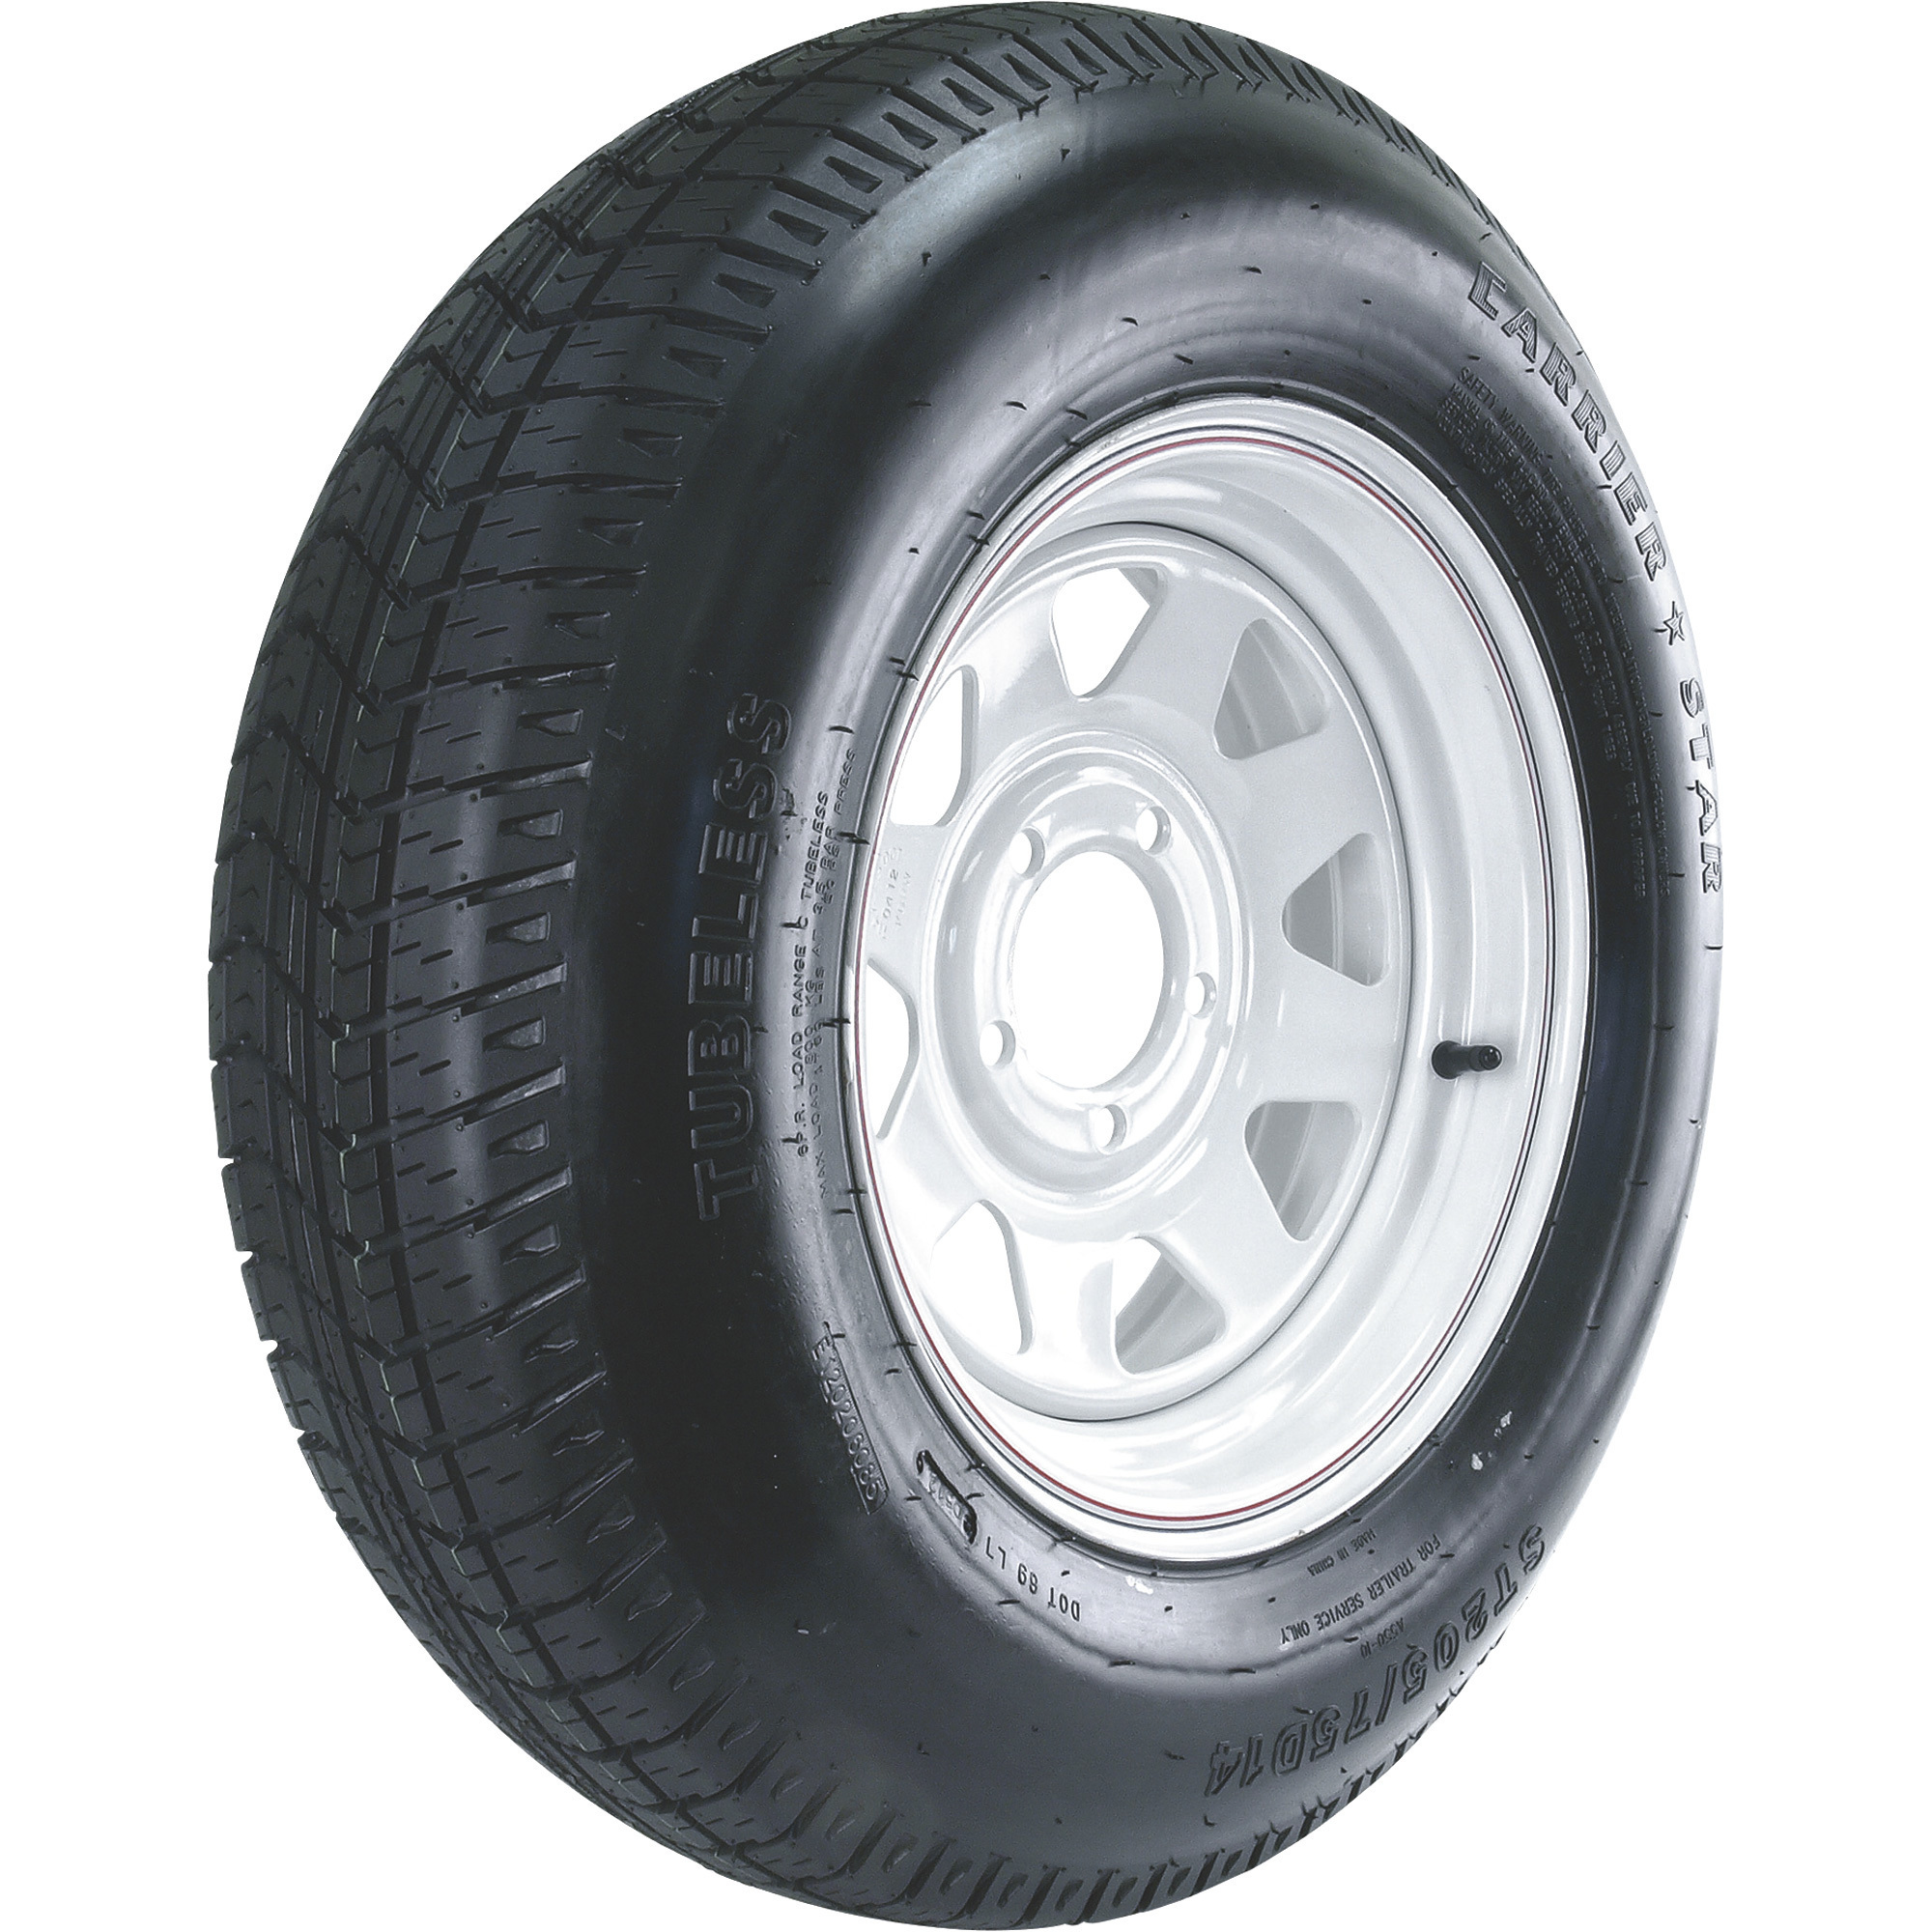 Martin Wheel Carrier Star 15Inch Bias Ply Trailer Tire and Wheel Assembly â ST205/75D-15, 5-Hole, Load Range C, Model DM205D5C-5CIN